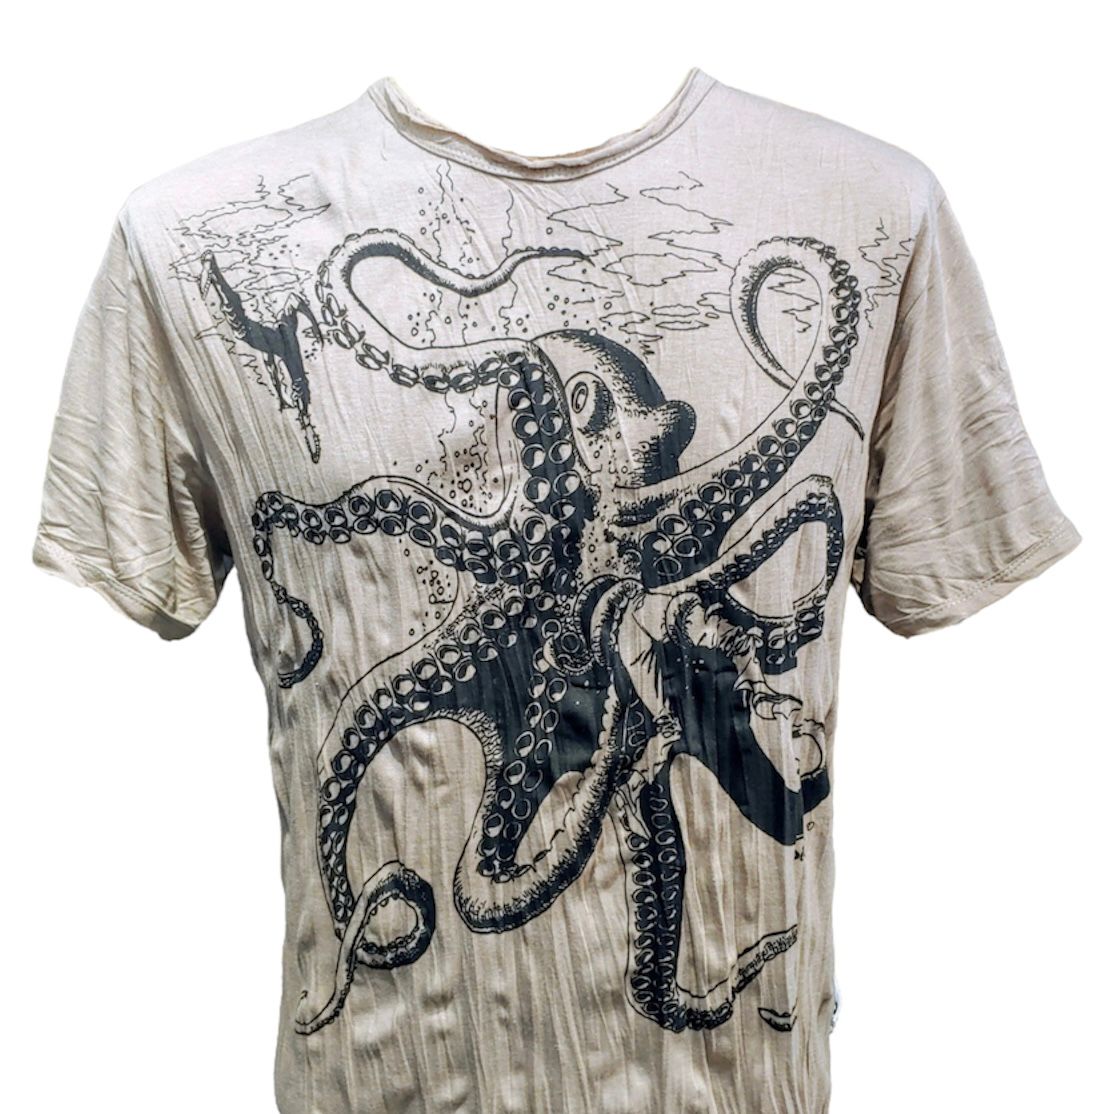 OCTOPUS ATTACK MEN'S T-SHIRT BY SURE